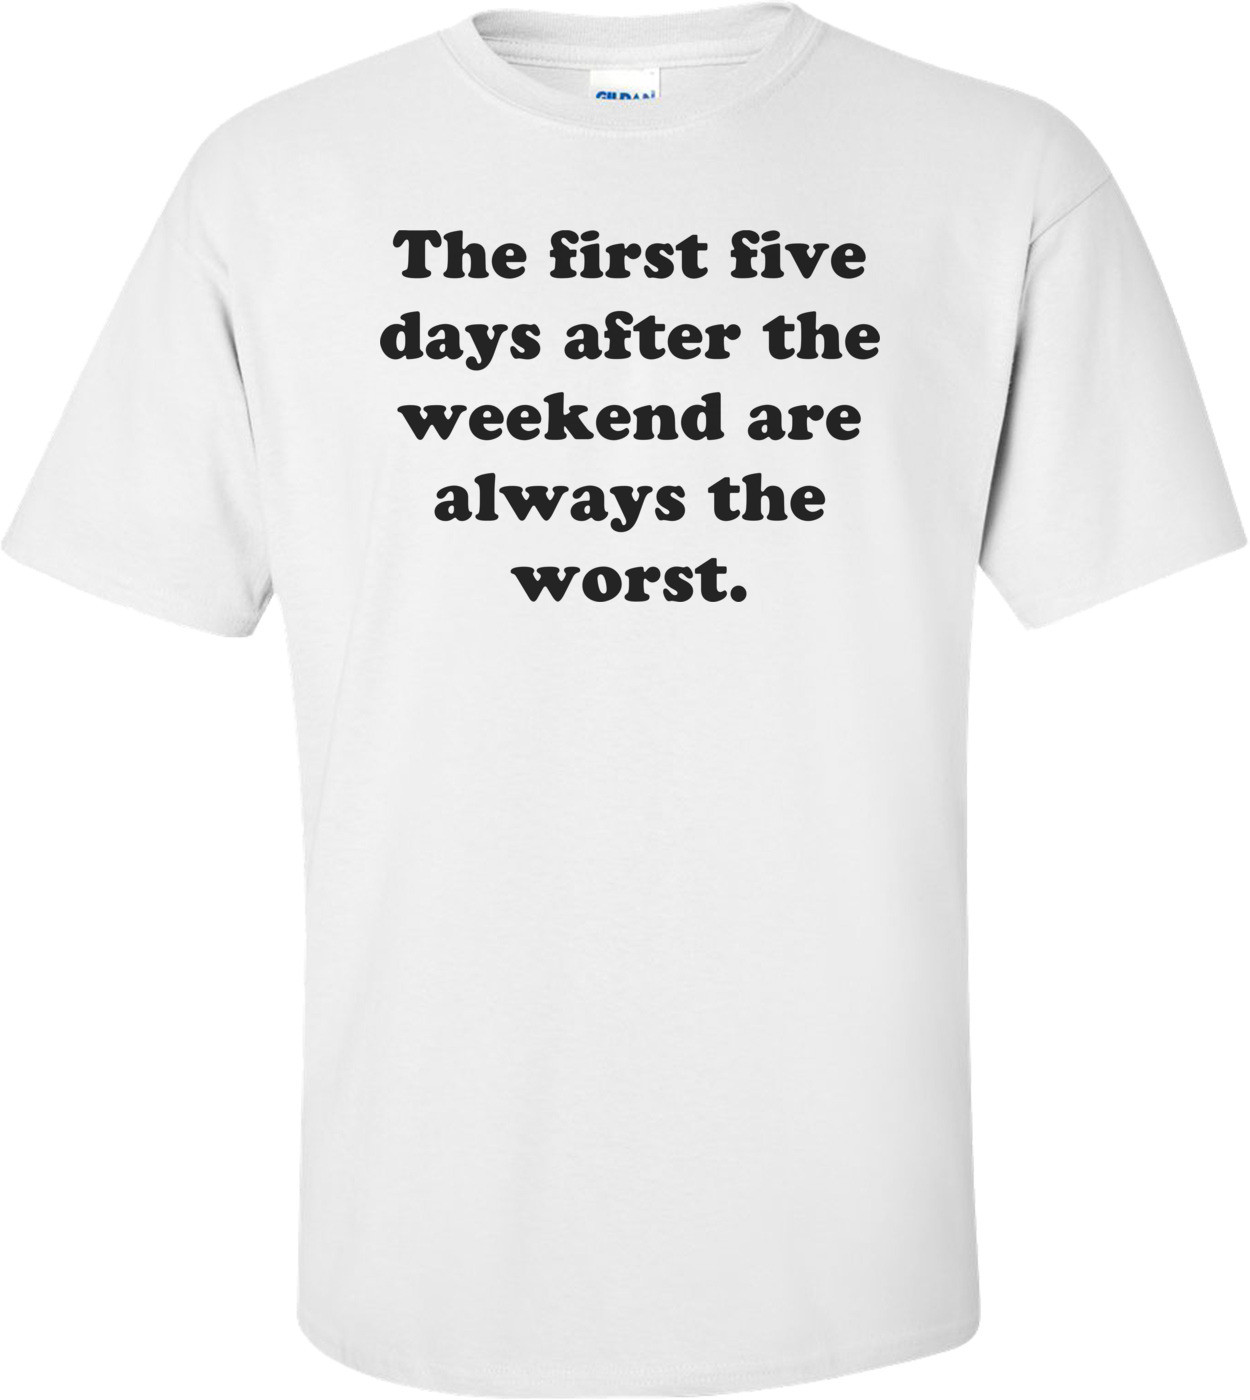 The first five days after the weekend are always the worst. Shirt